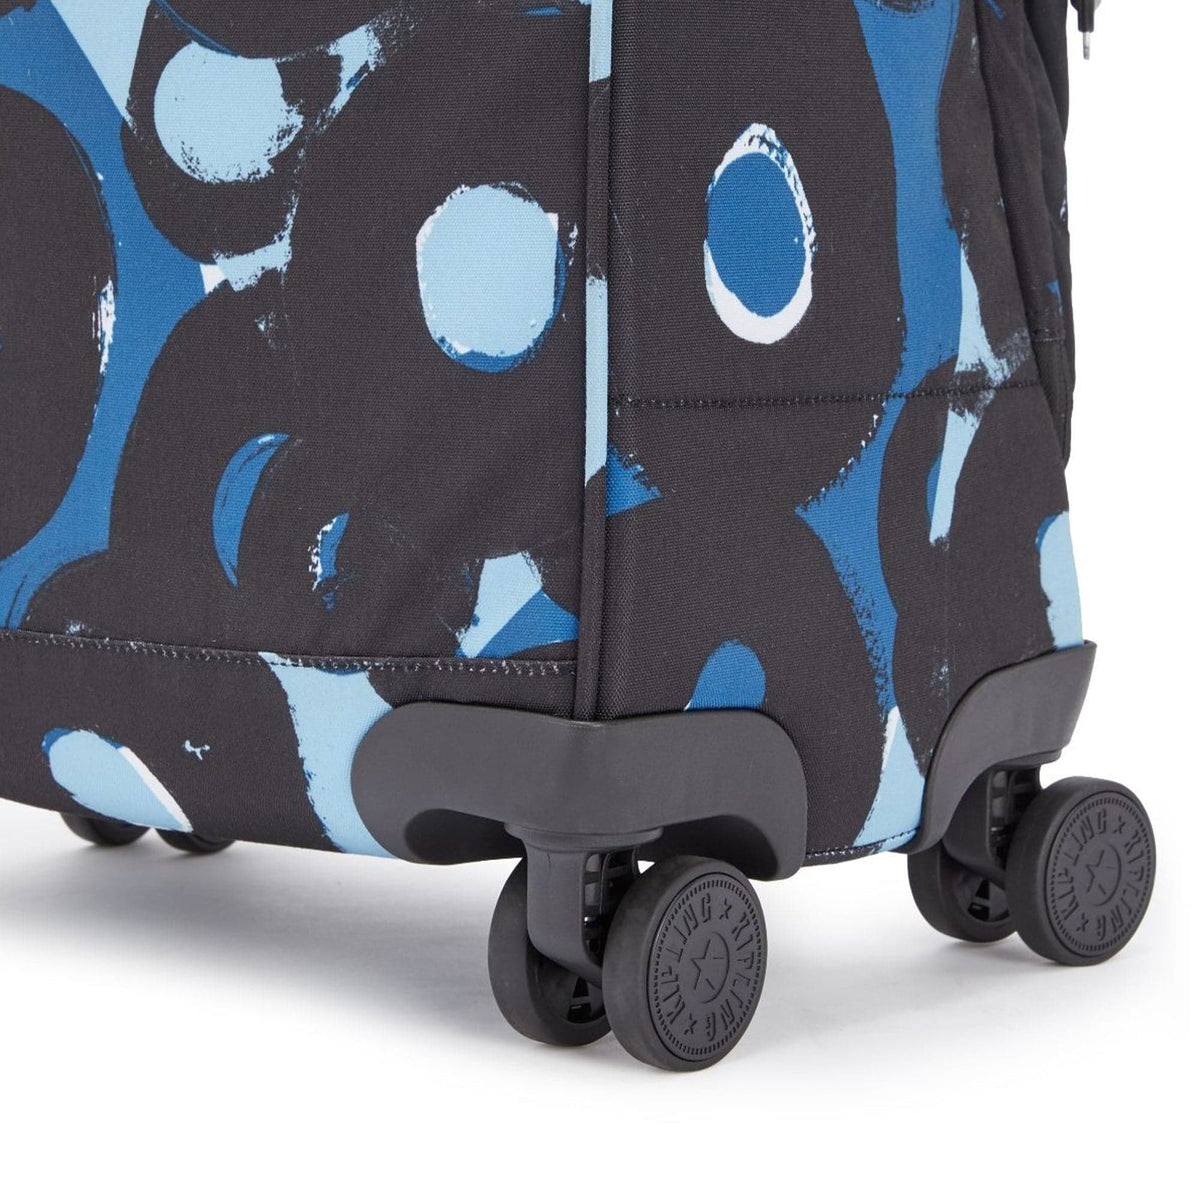 Kipling City Spinner Small 4-Wheeled Expandable Cabin Trolley Bag